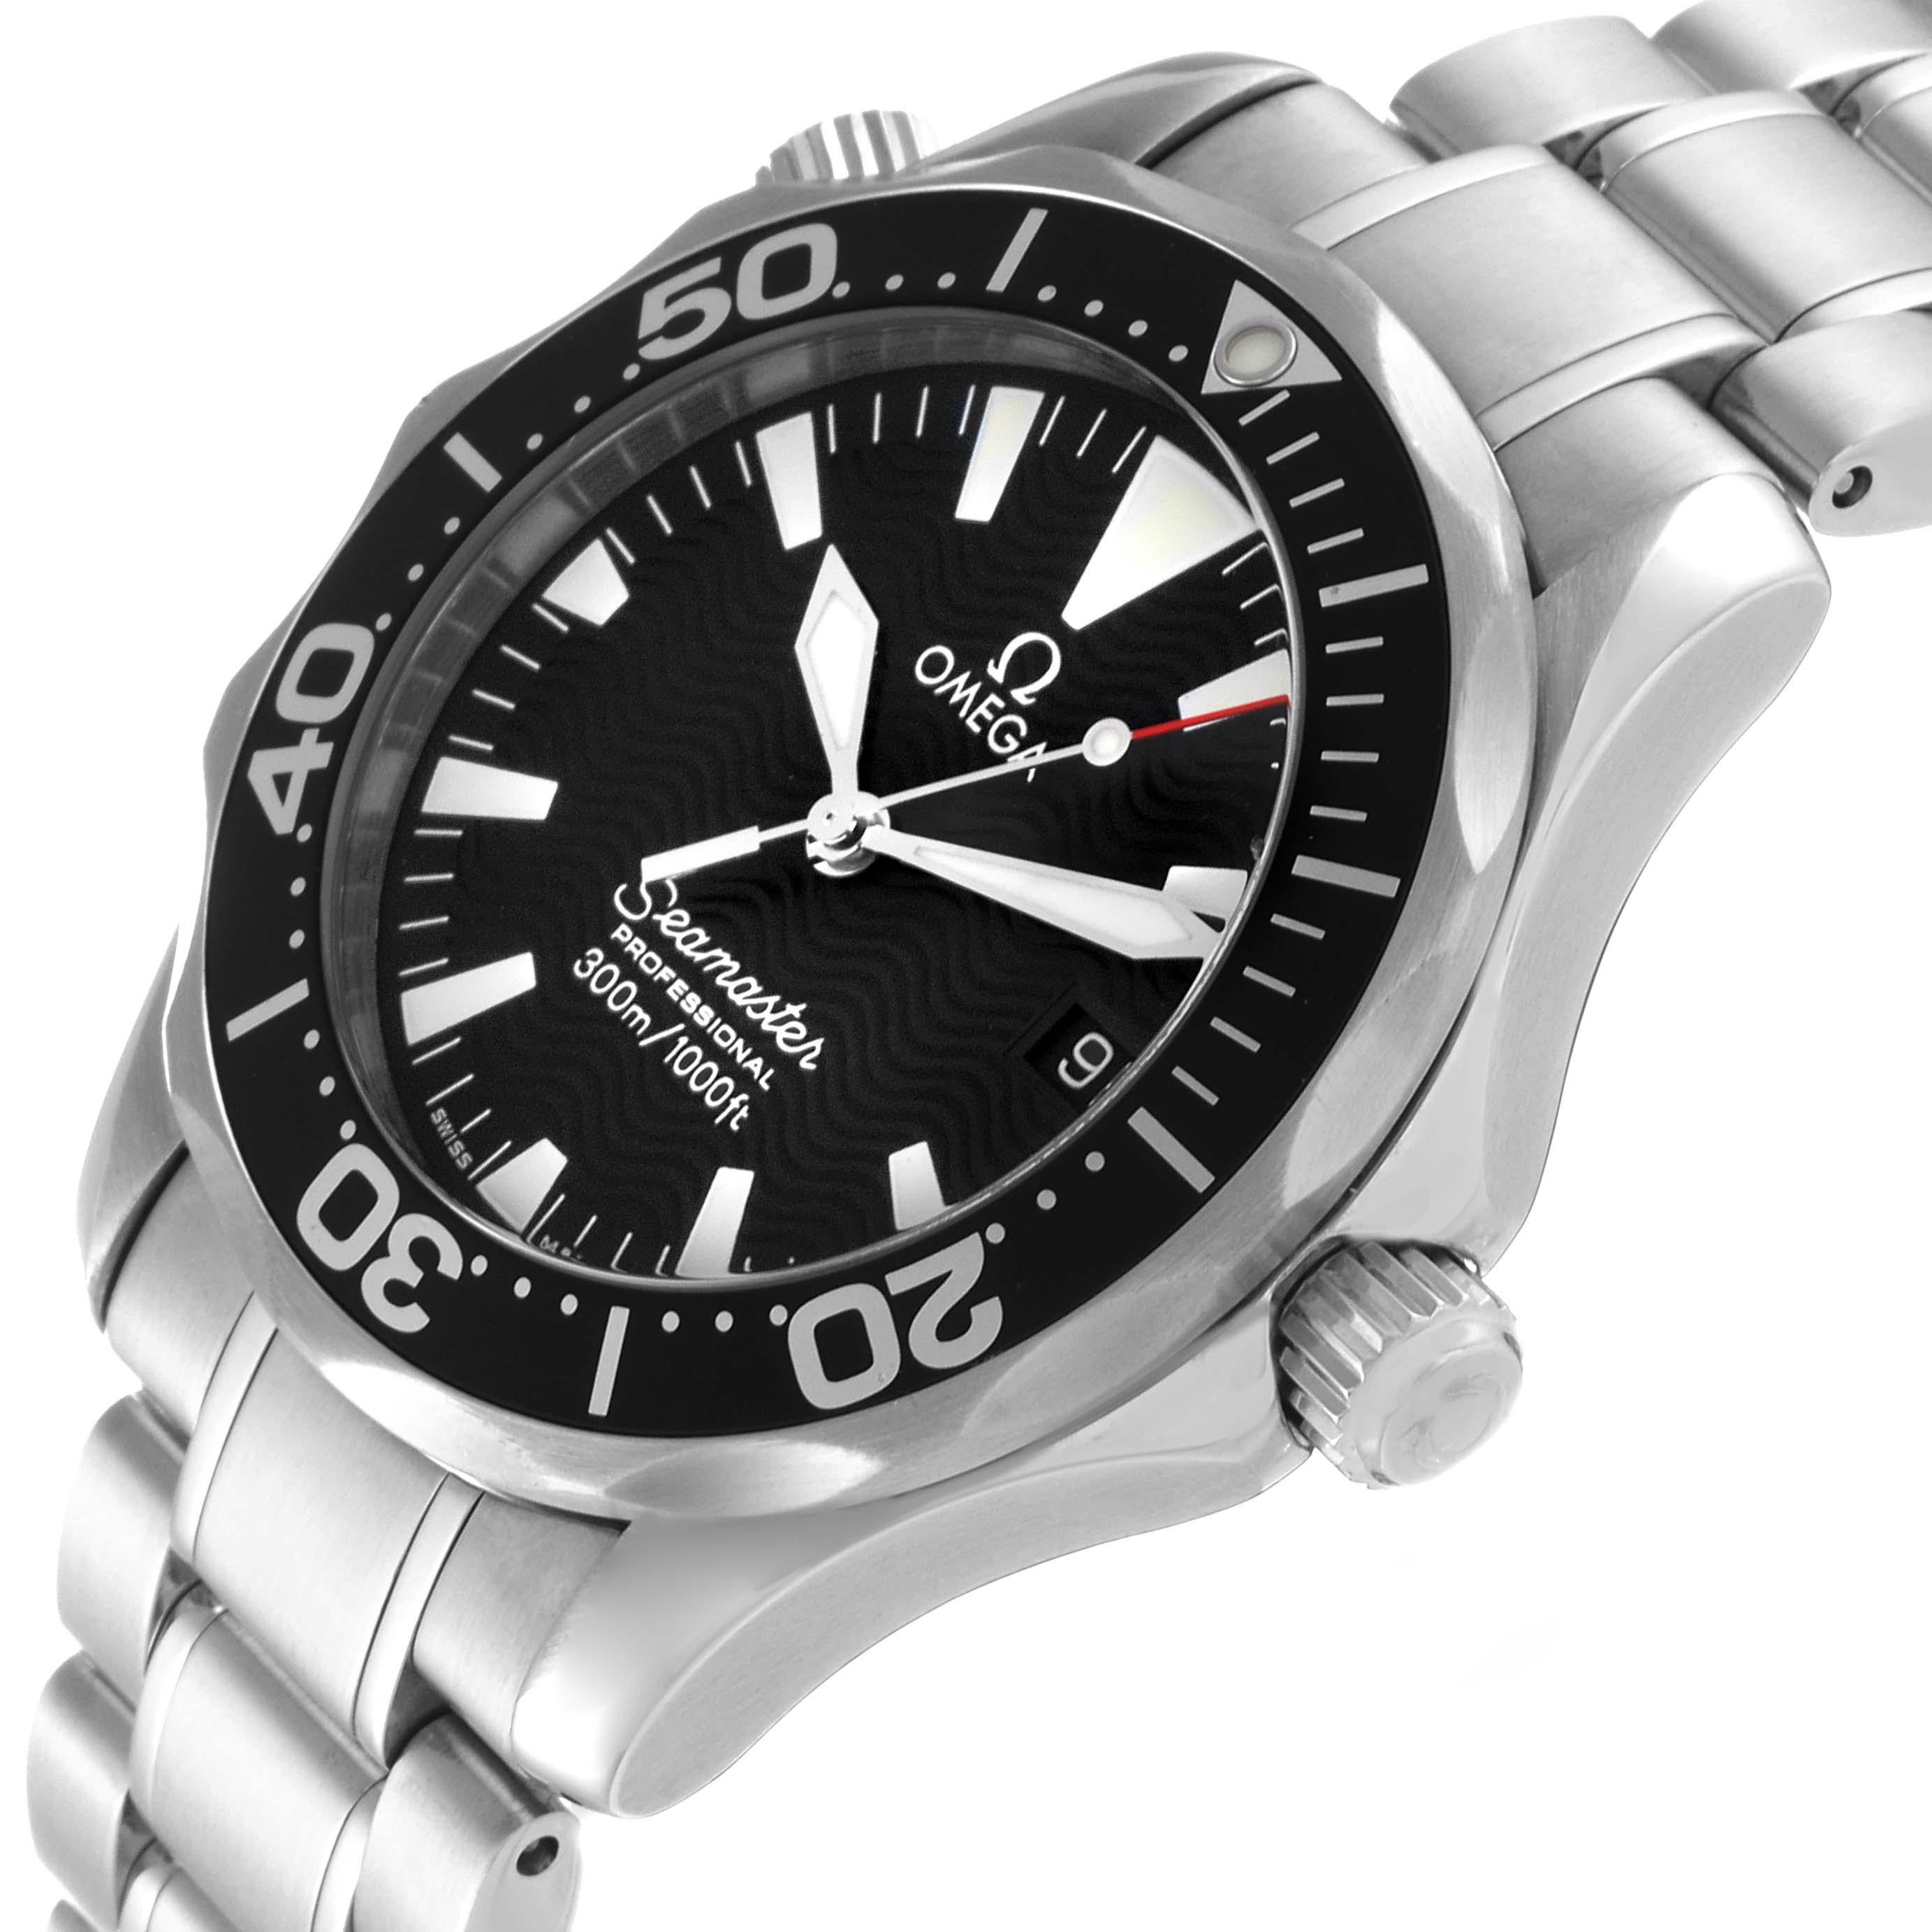 Omega Seamaster Diver Midsize Black Dial Steel Mens Watch 2262.50.00. Quartz movement. Stainless steel case 36.25 mm in diameter. Helium escape valve at 10 o'clock. Omega logo on the crown. Black unidirectional rotating bezel. Scratch resistant